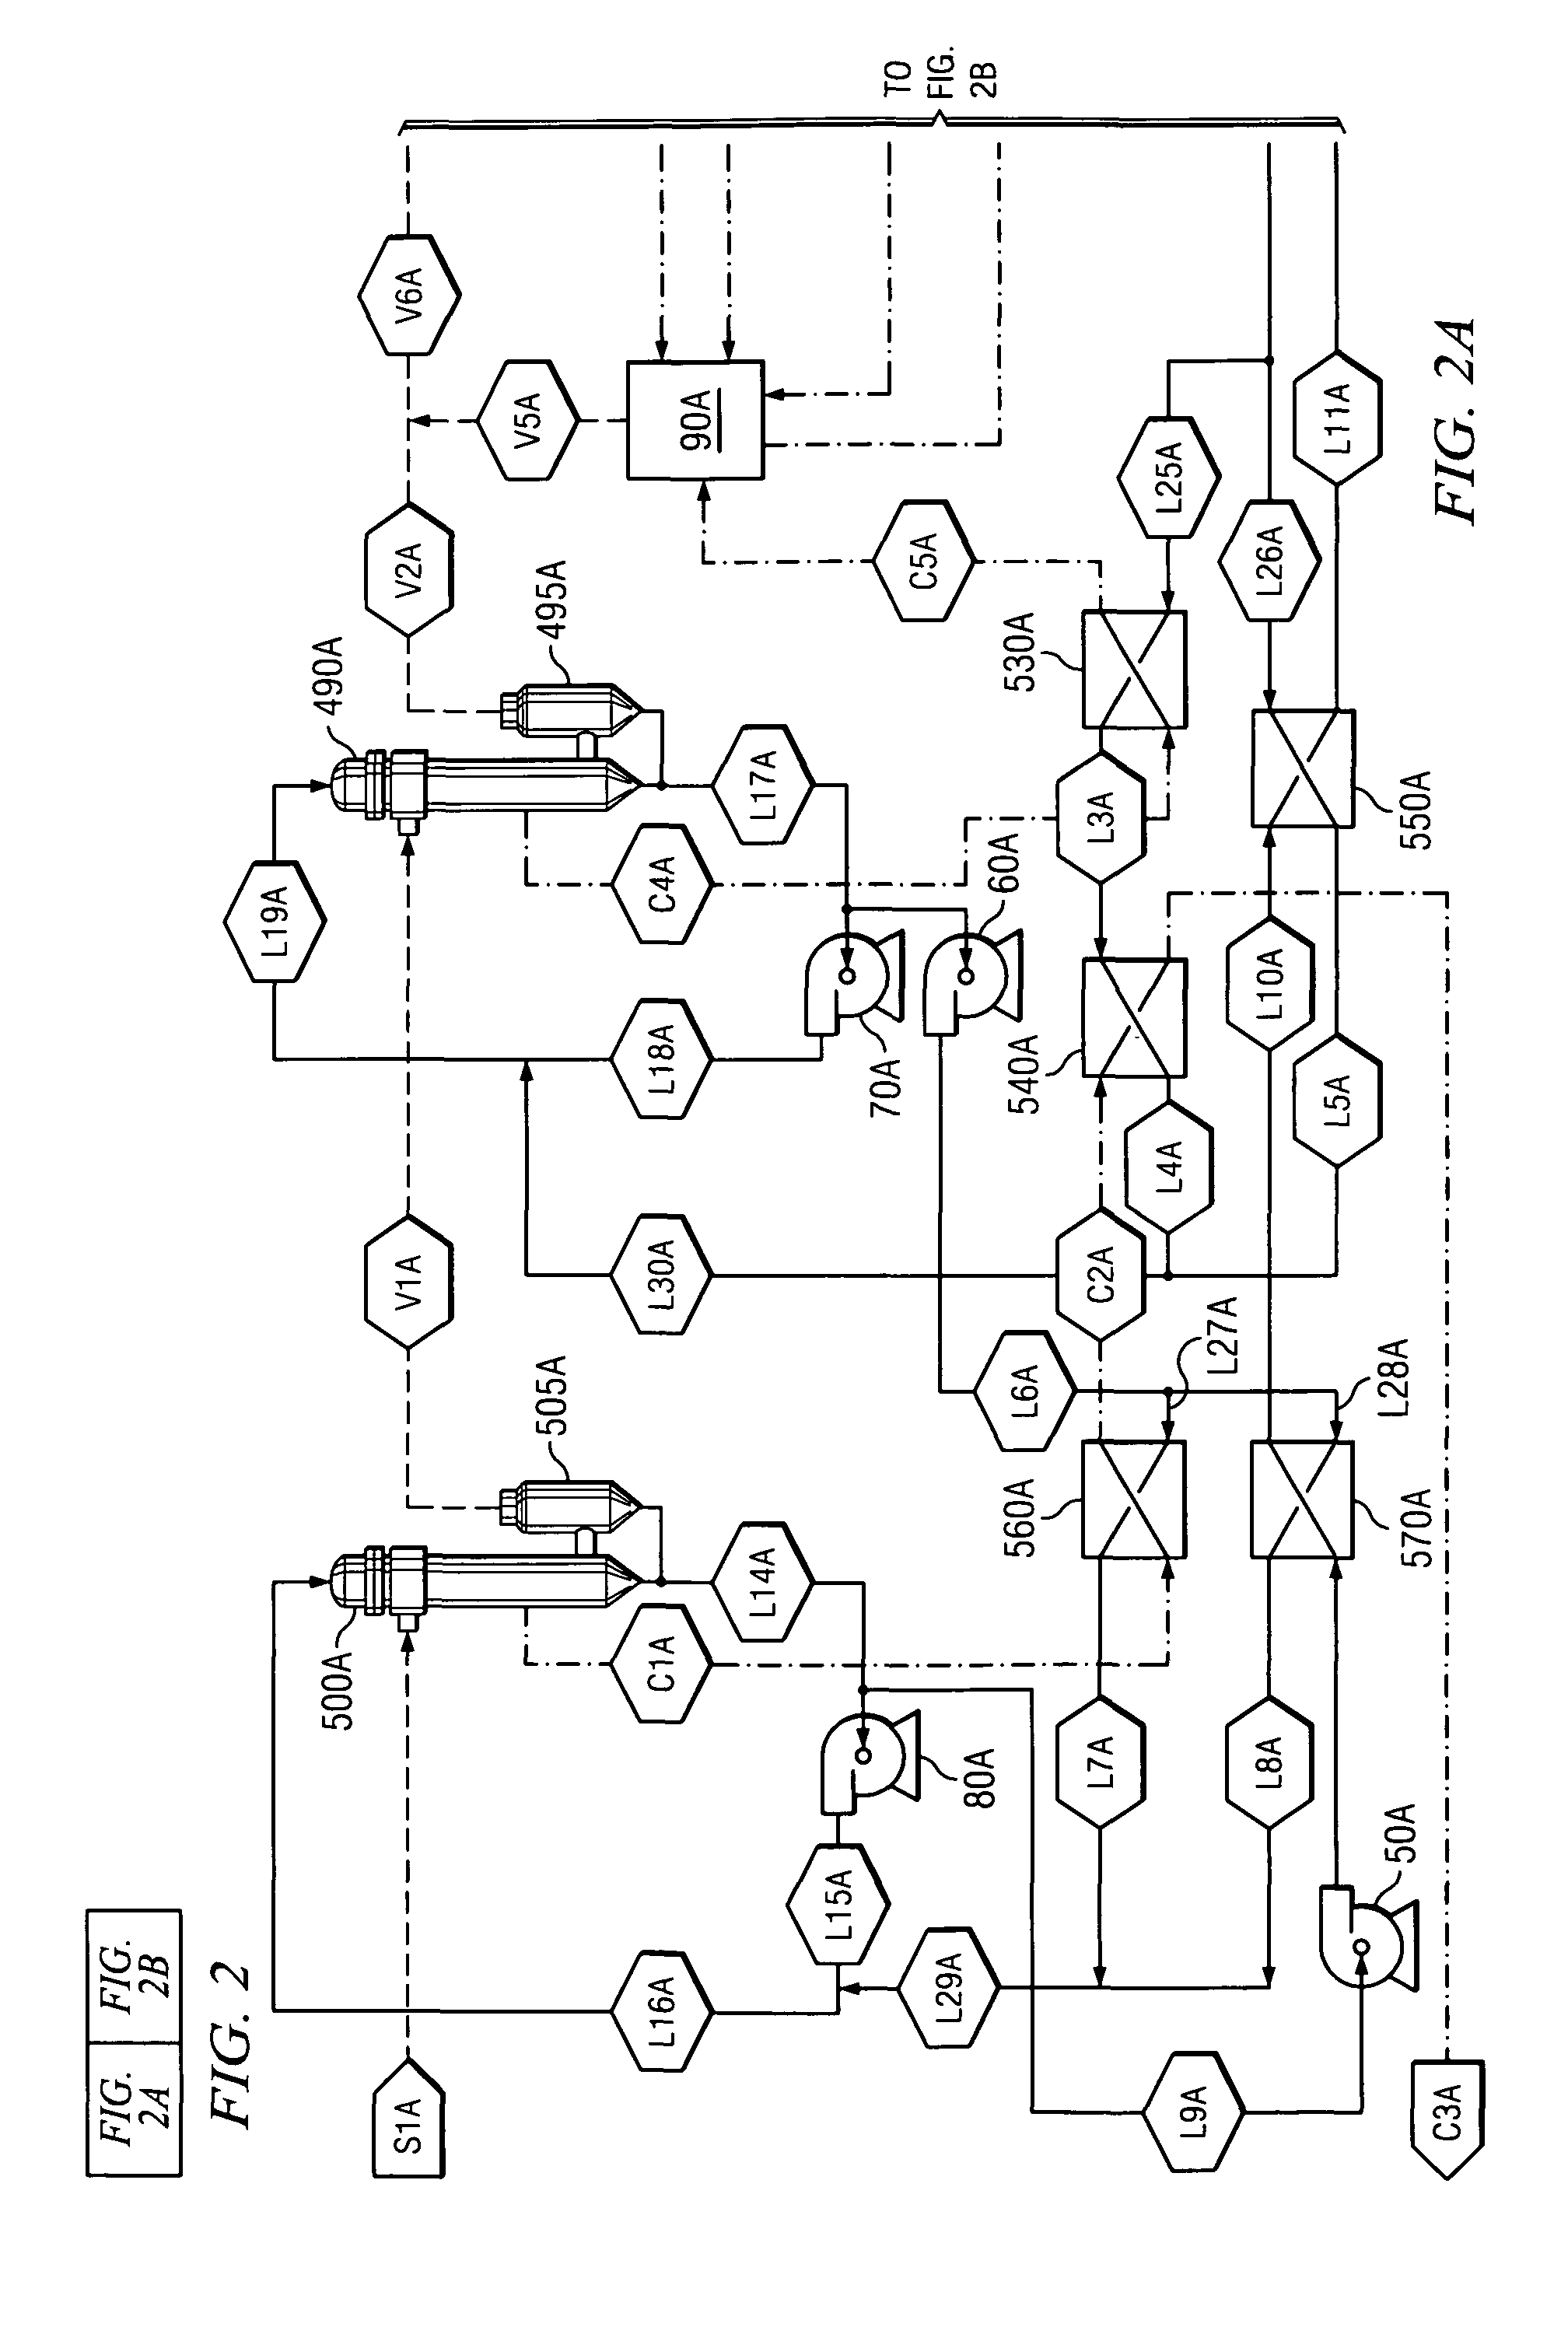 Method of concentrating an aqueous caustic alkali using a catholyte heat recovery evaporator